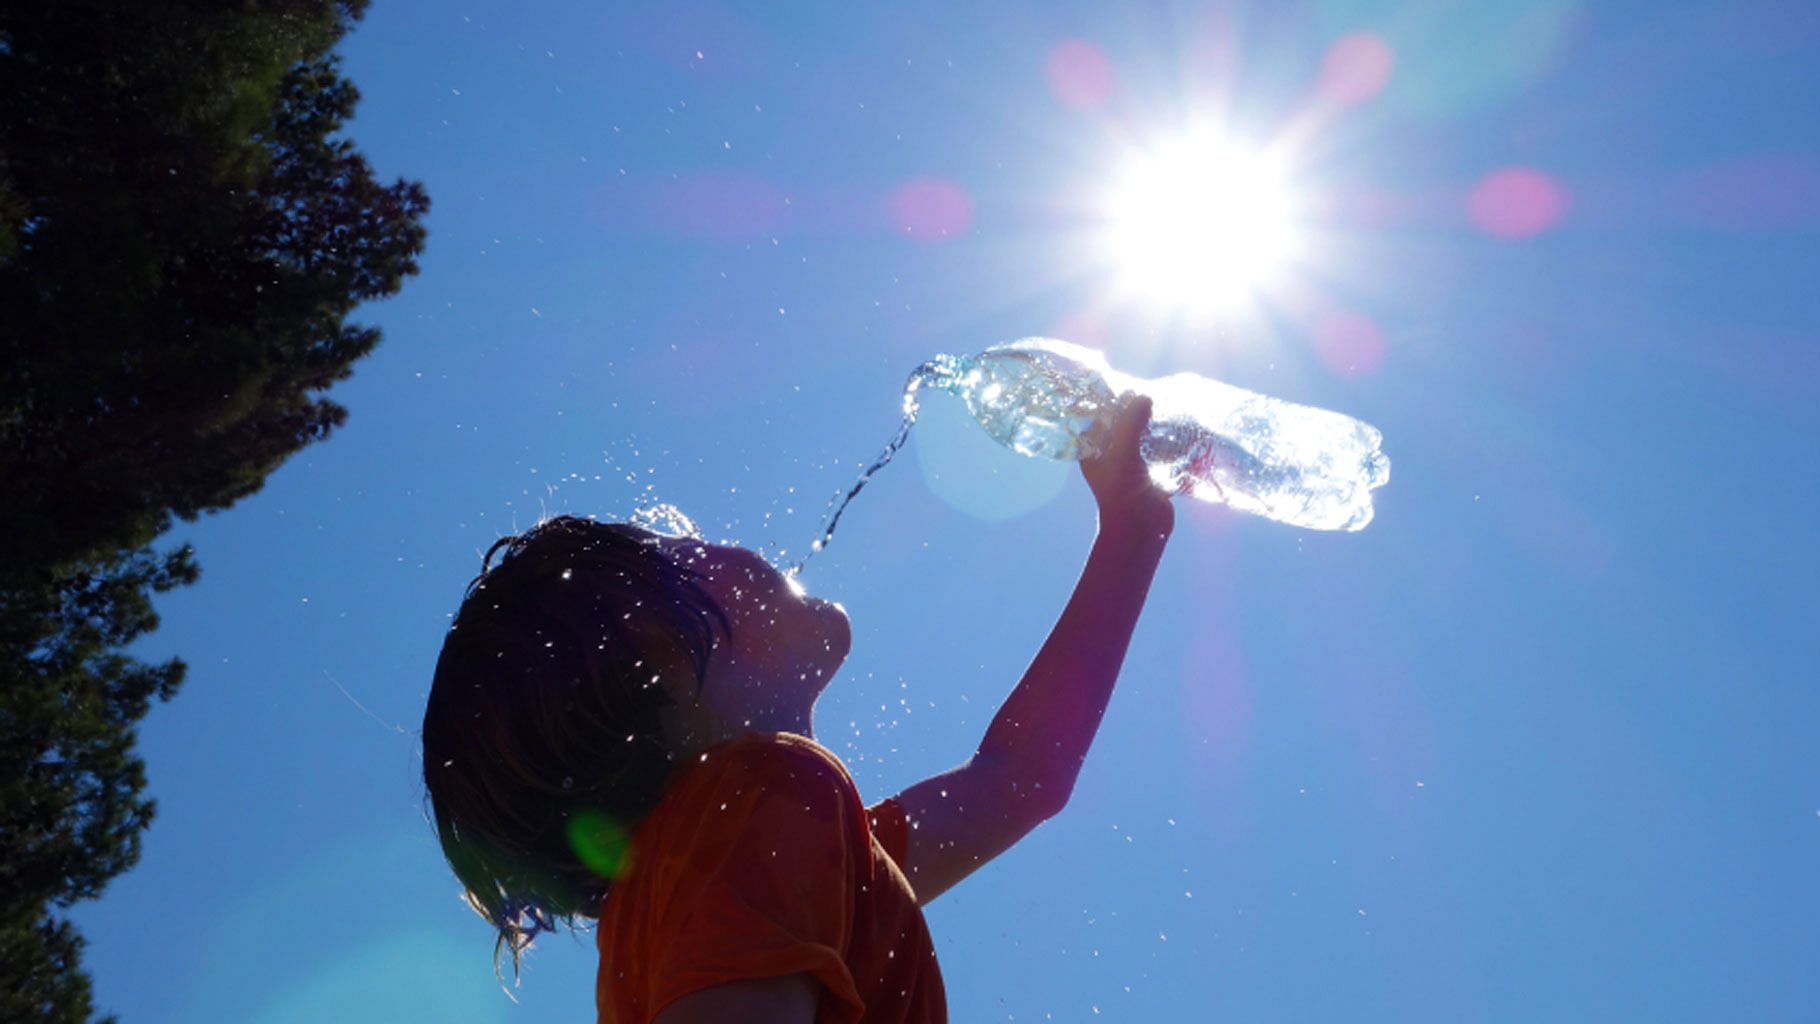 Telangana and Odisha are reeling under an intense heat wave, with dozens of lives lost in both states. (Photo: iStock)